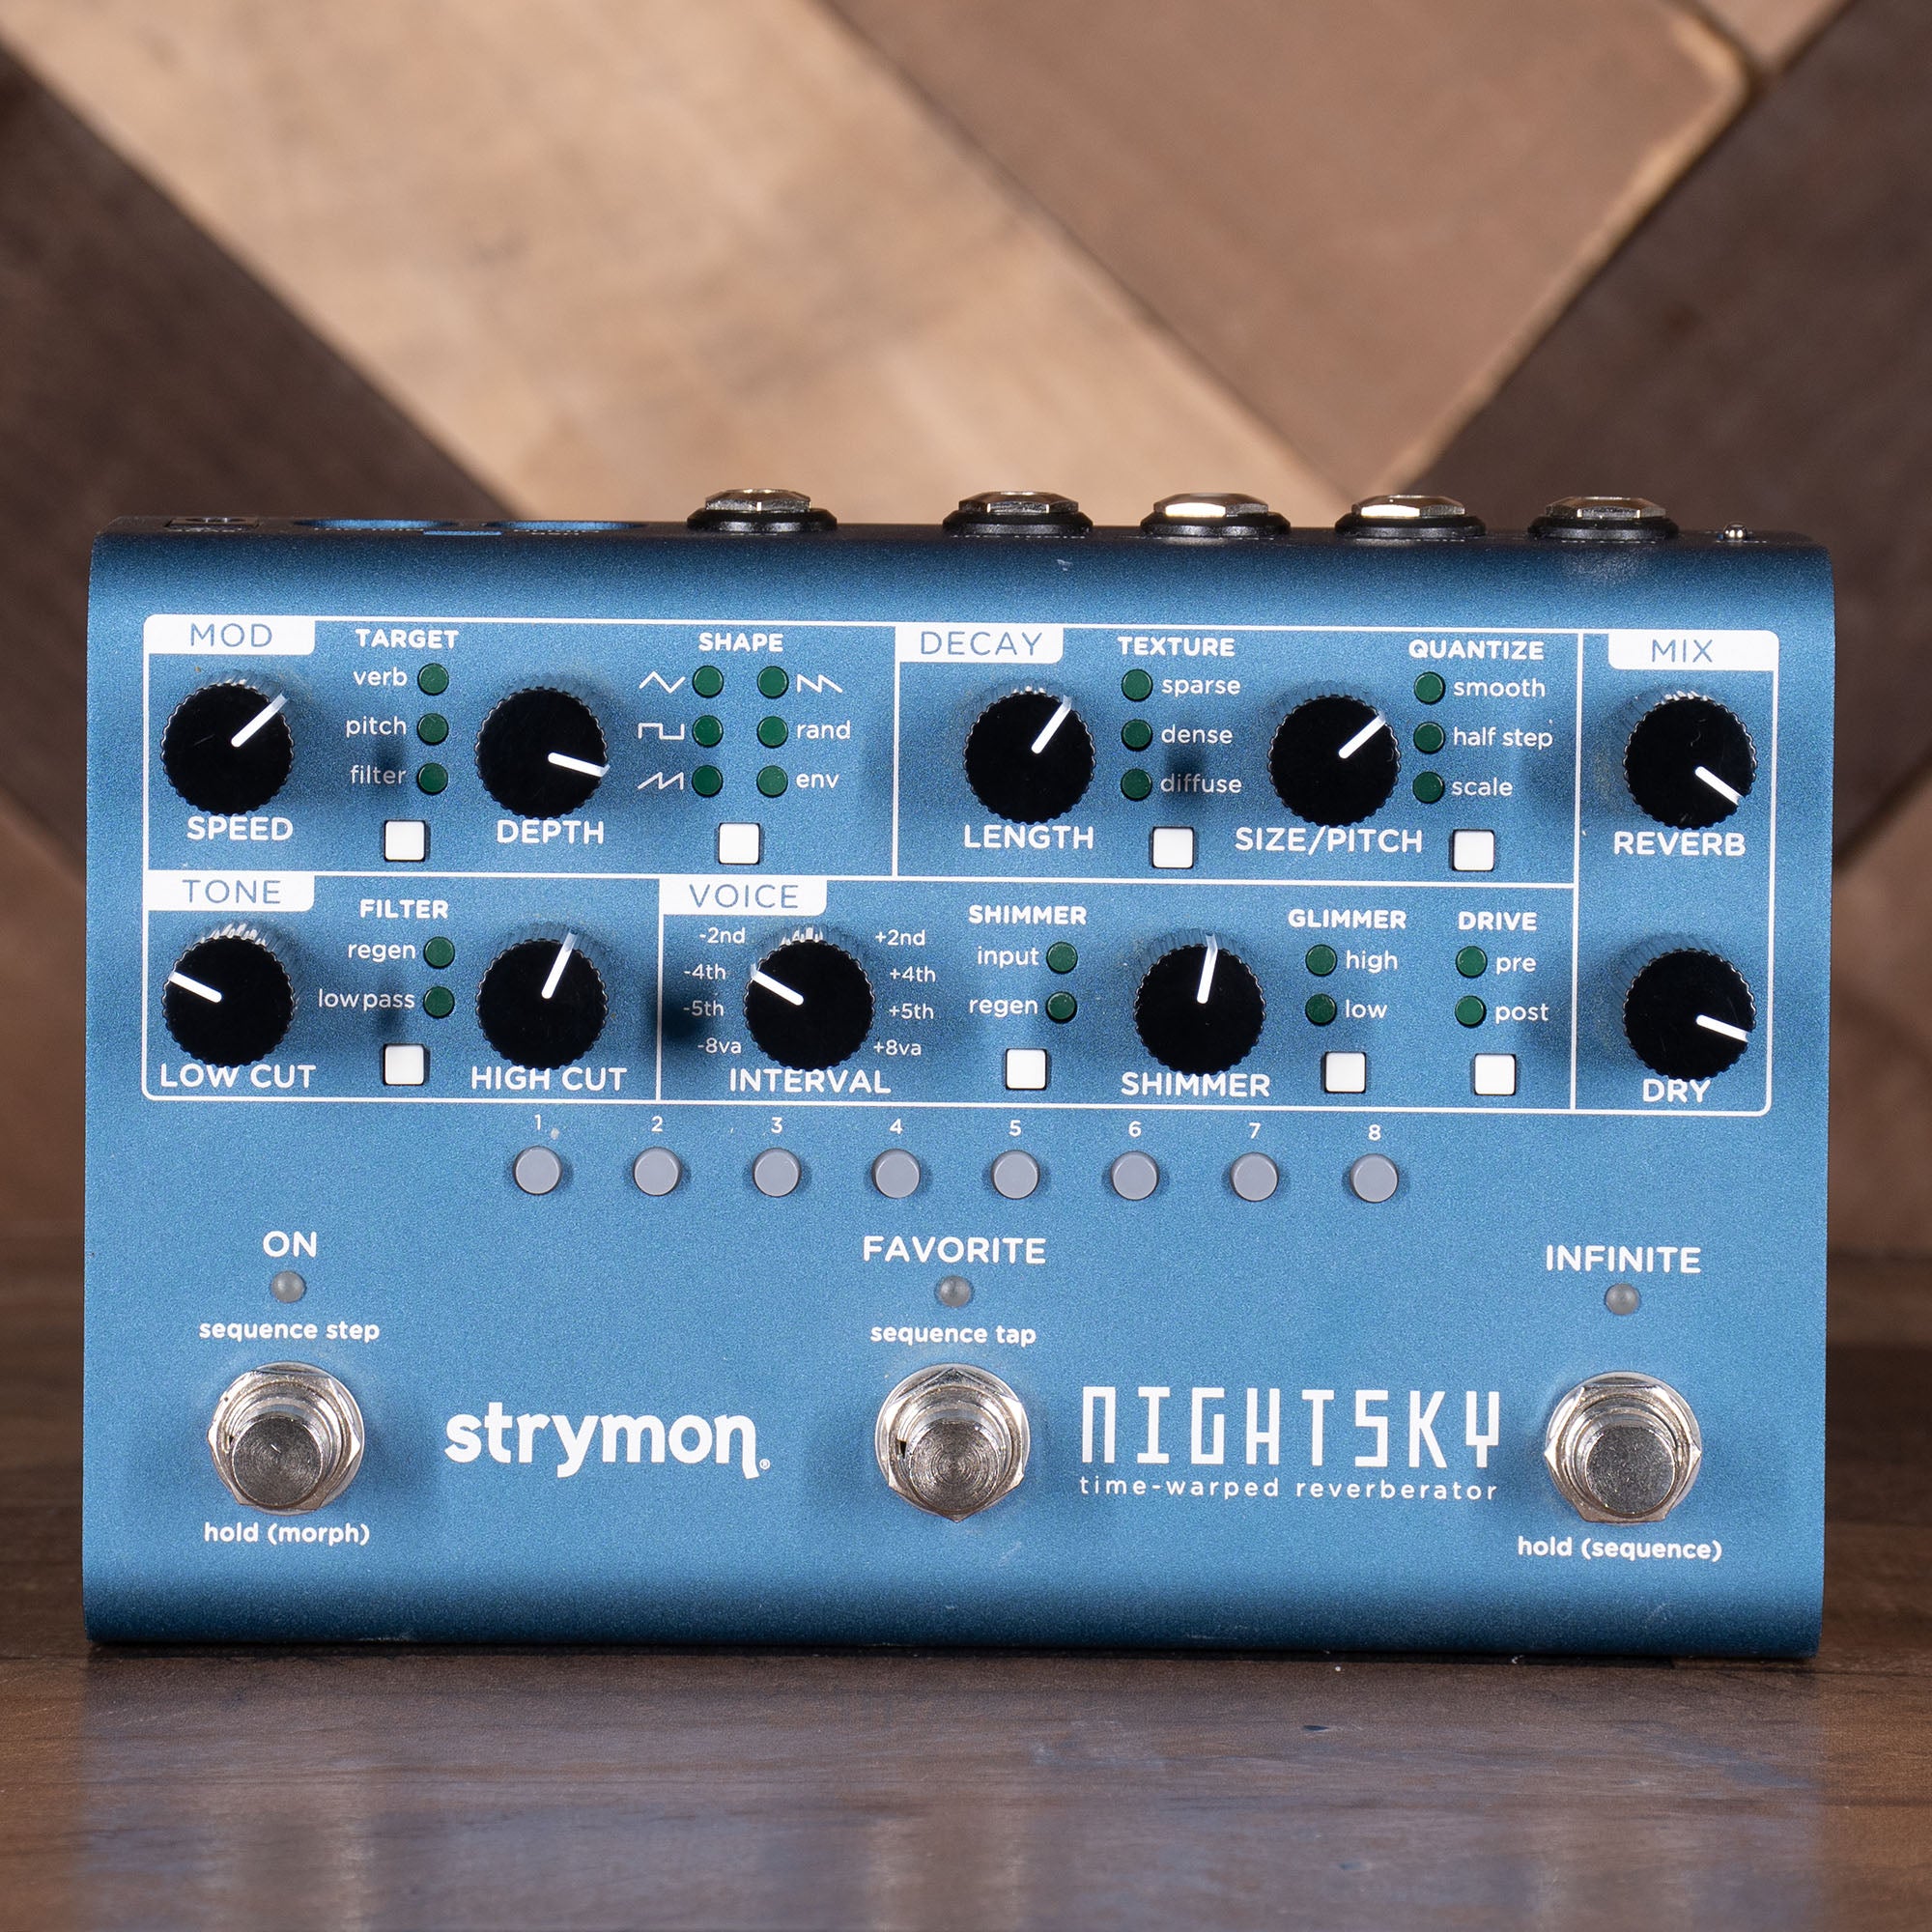 Strymon Nightsky Time-Warped Reverberator Effect Pedal With Box - Used